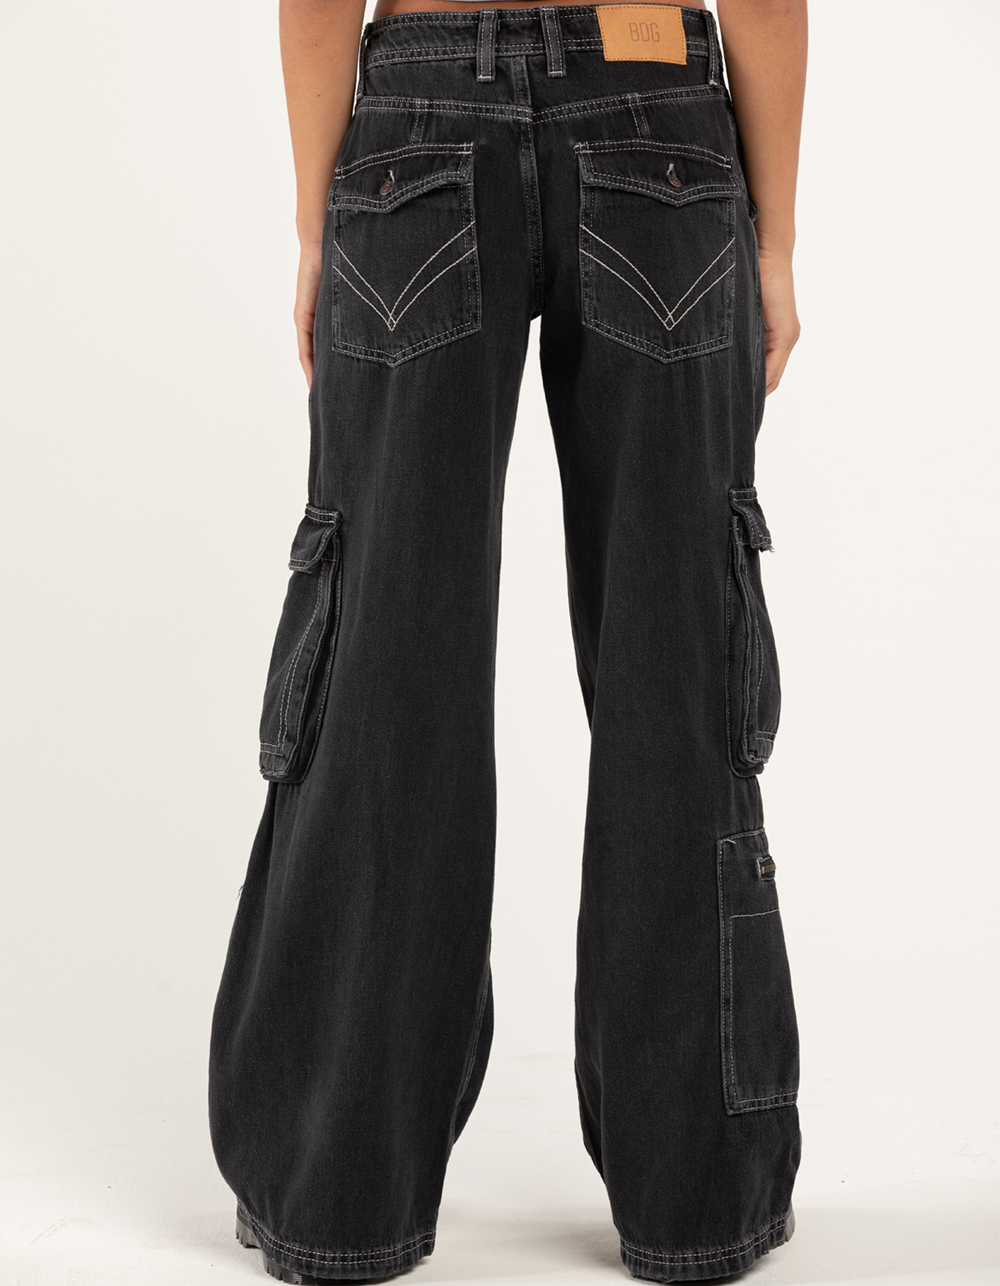 BDG Urban Outfitters Womens Cargo Puddle Pants - BLACK, Tillys